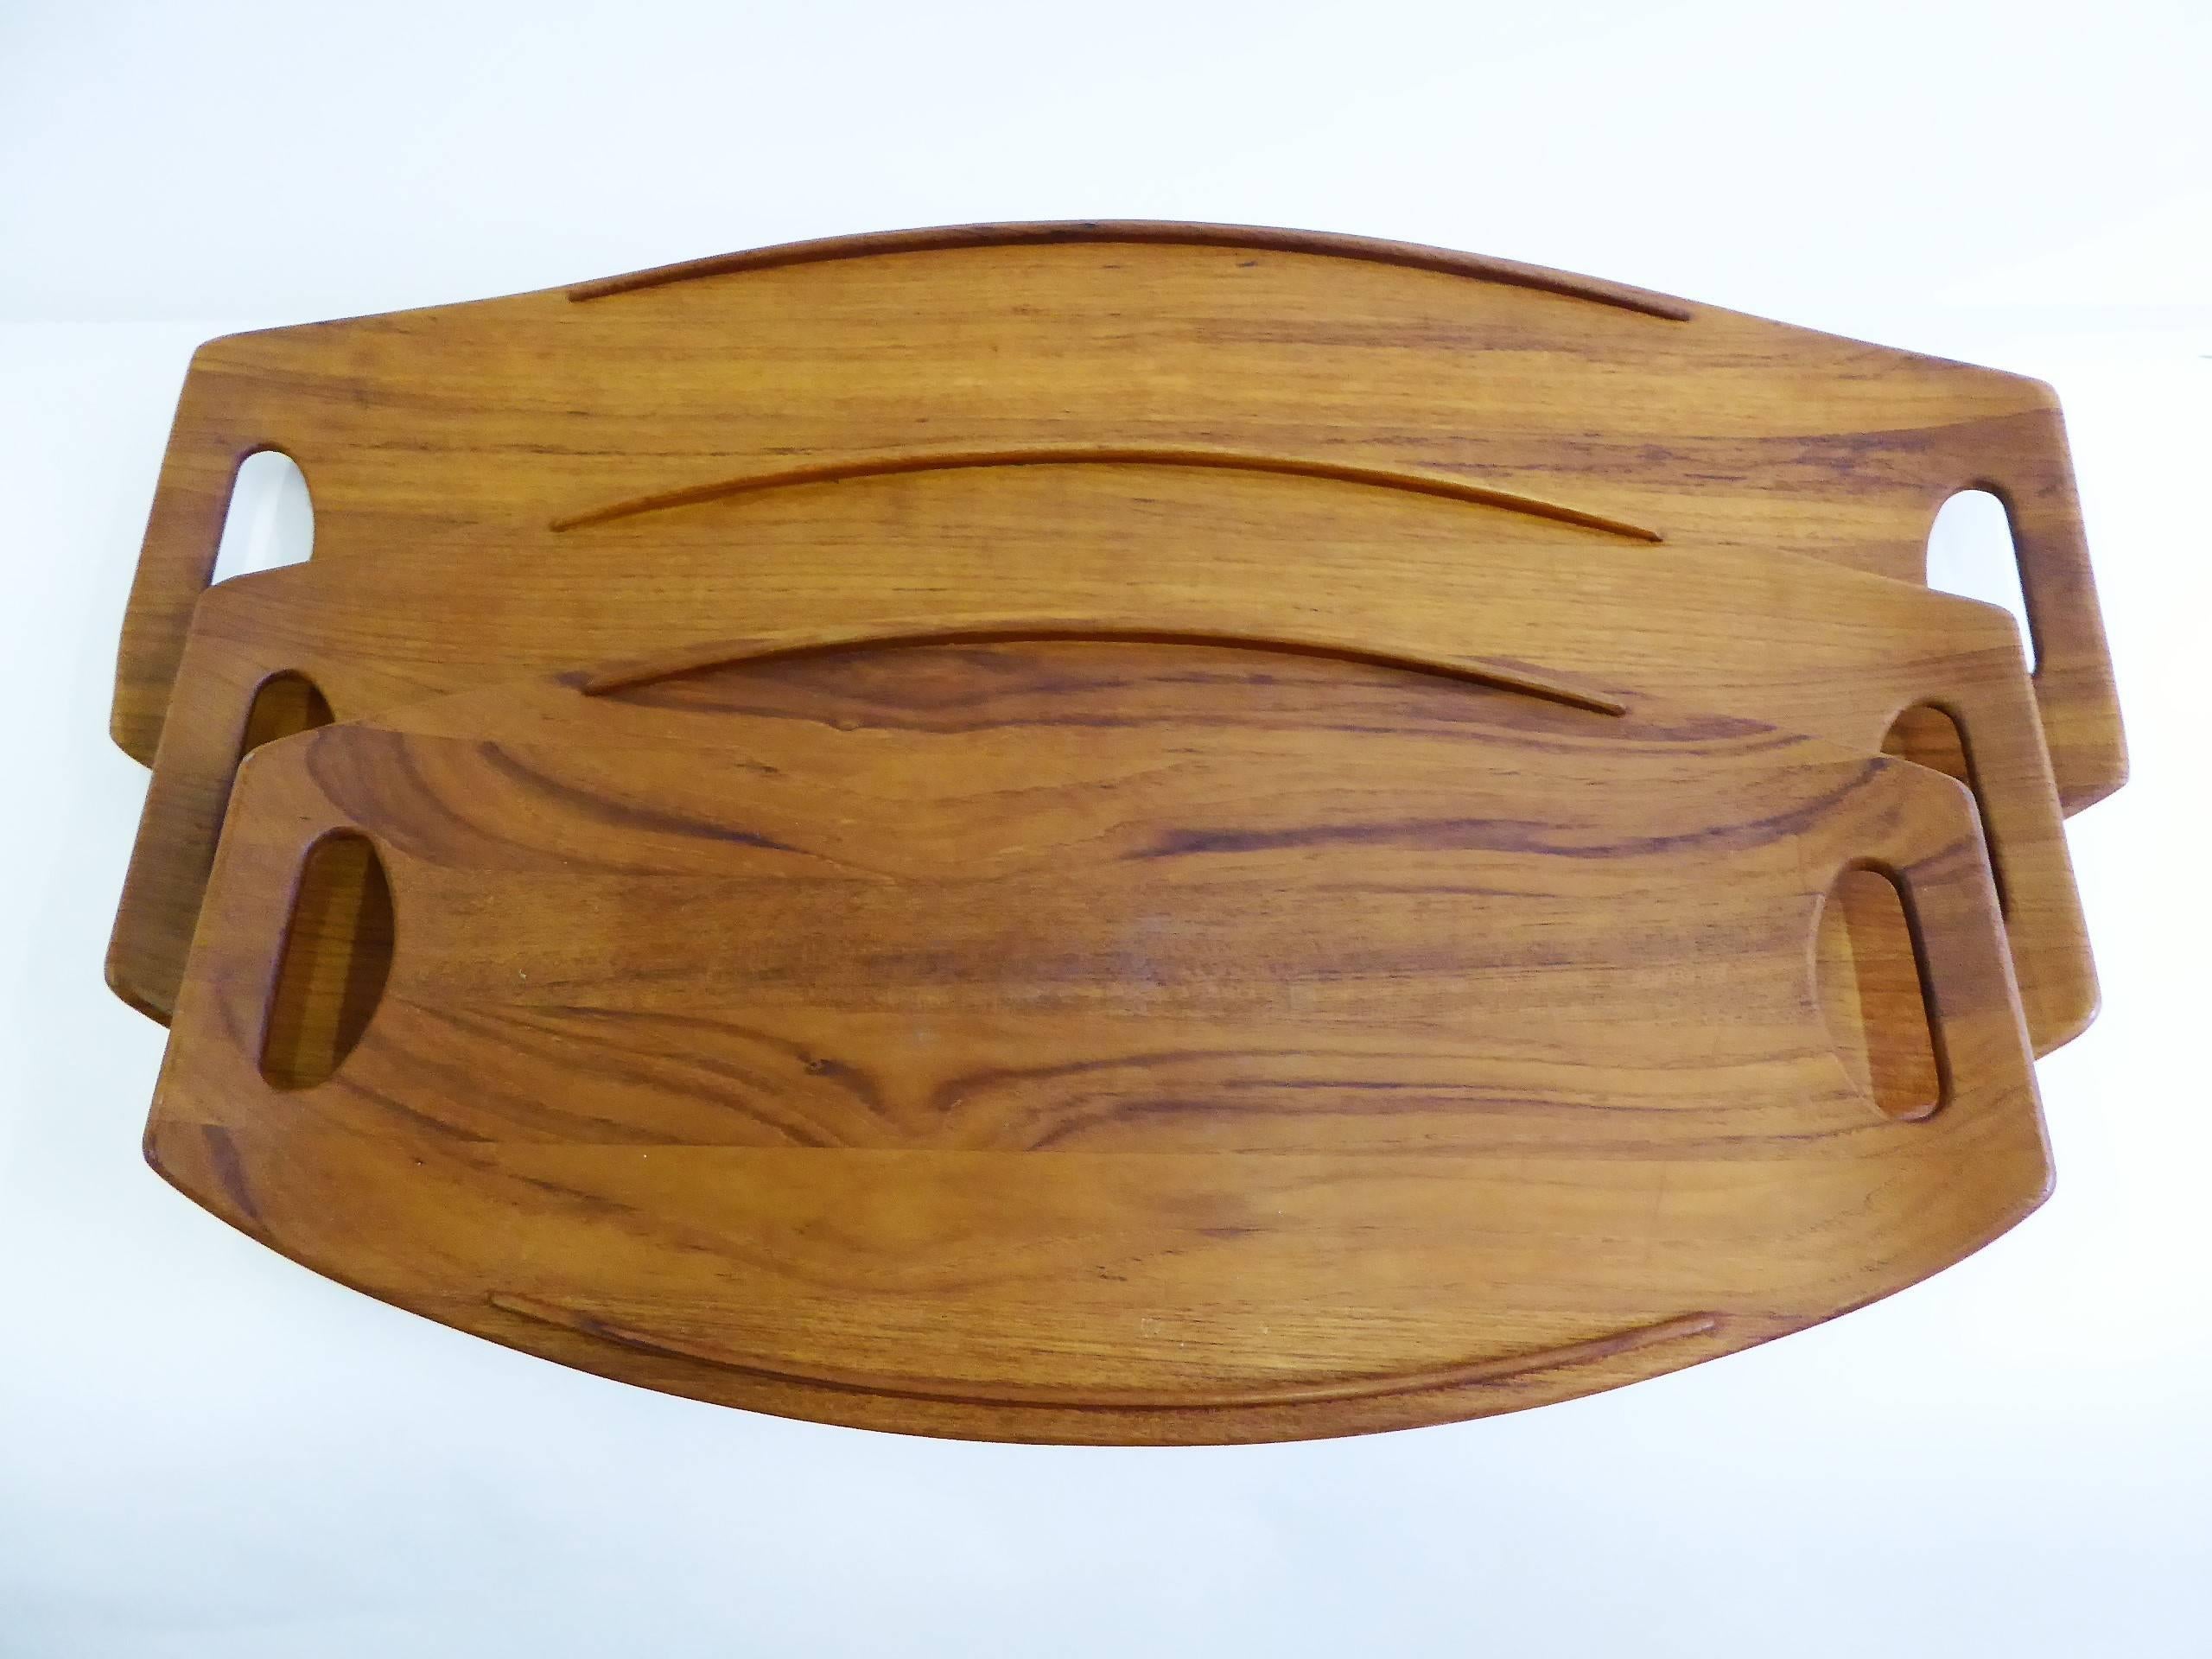 Three classic Fjord Teak Trays, designed in 1956 by Jens Quistgaard for Dansk Designs. All made in Denmark, with early Four Ducks Dansk logo and the larger two stamped also with 802 and 803. The 801, 802, and 803 teak trays which originally date